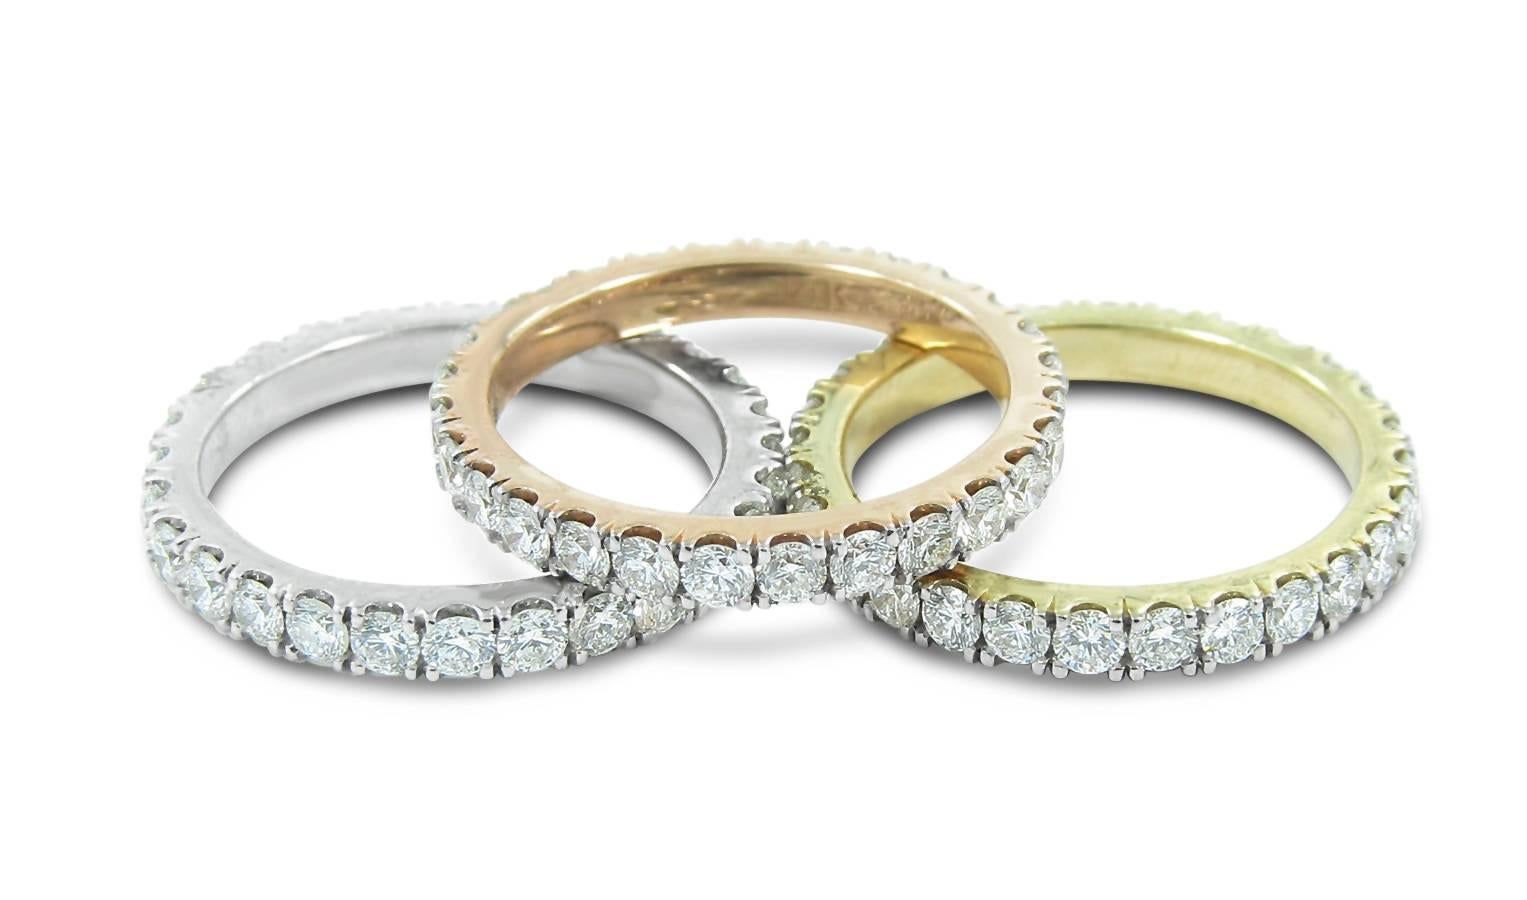 These 3 stackable eternity bands have a total of 3.08cts of round brilliant cut diamonds. They are constructed of 14k White, Yellow and Rose Gold. Rings are all at a size 5.50.